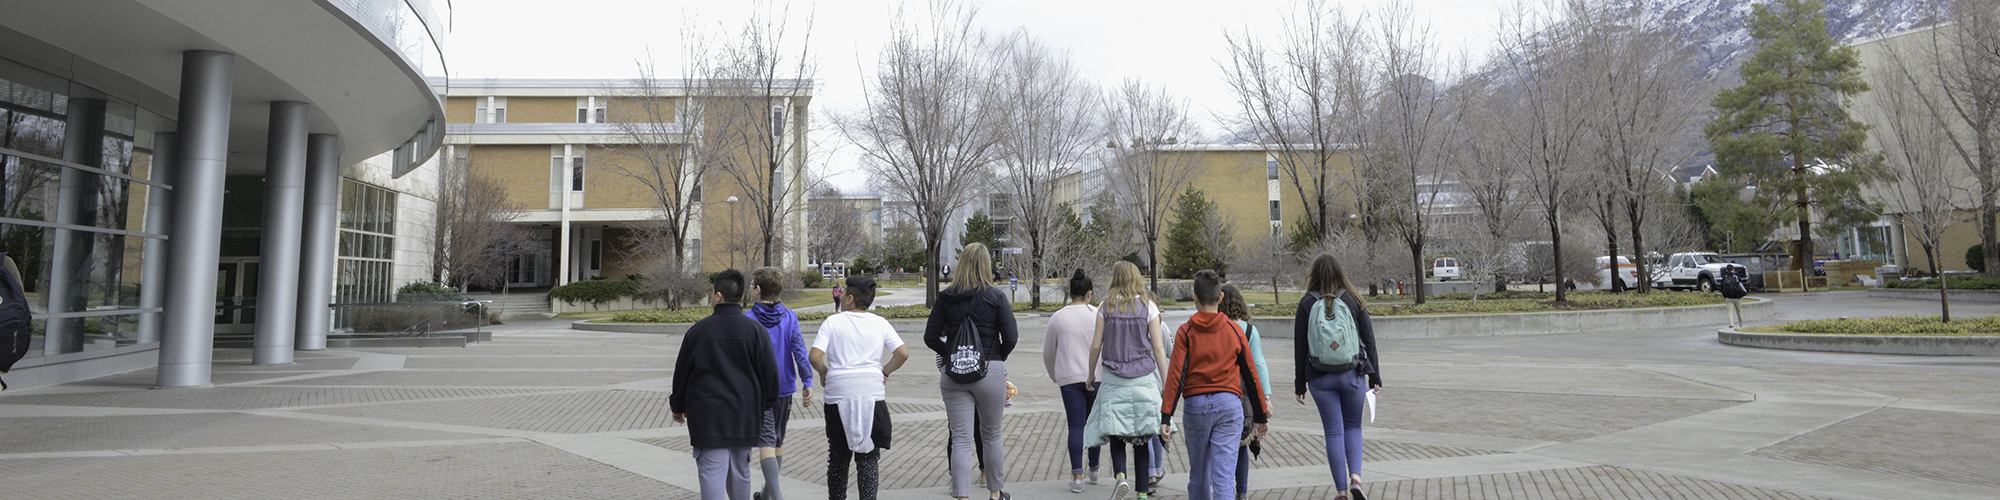 Students and youth touring campus